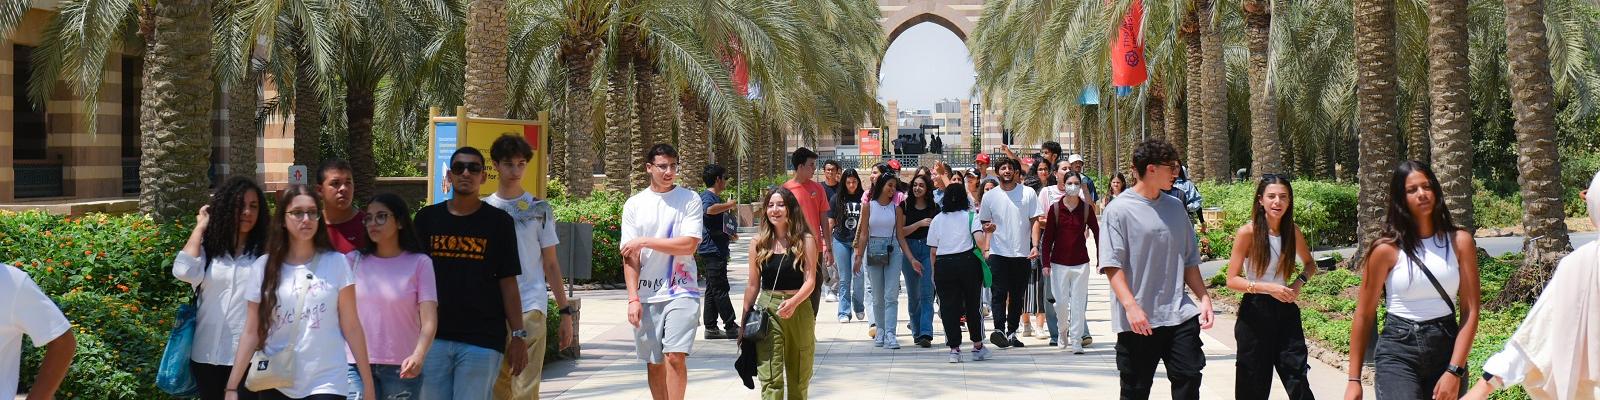 auc students walking on campus